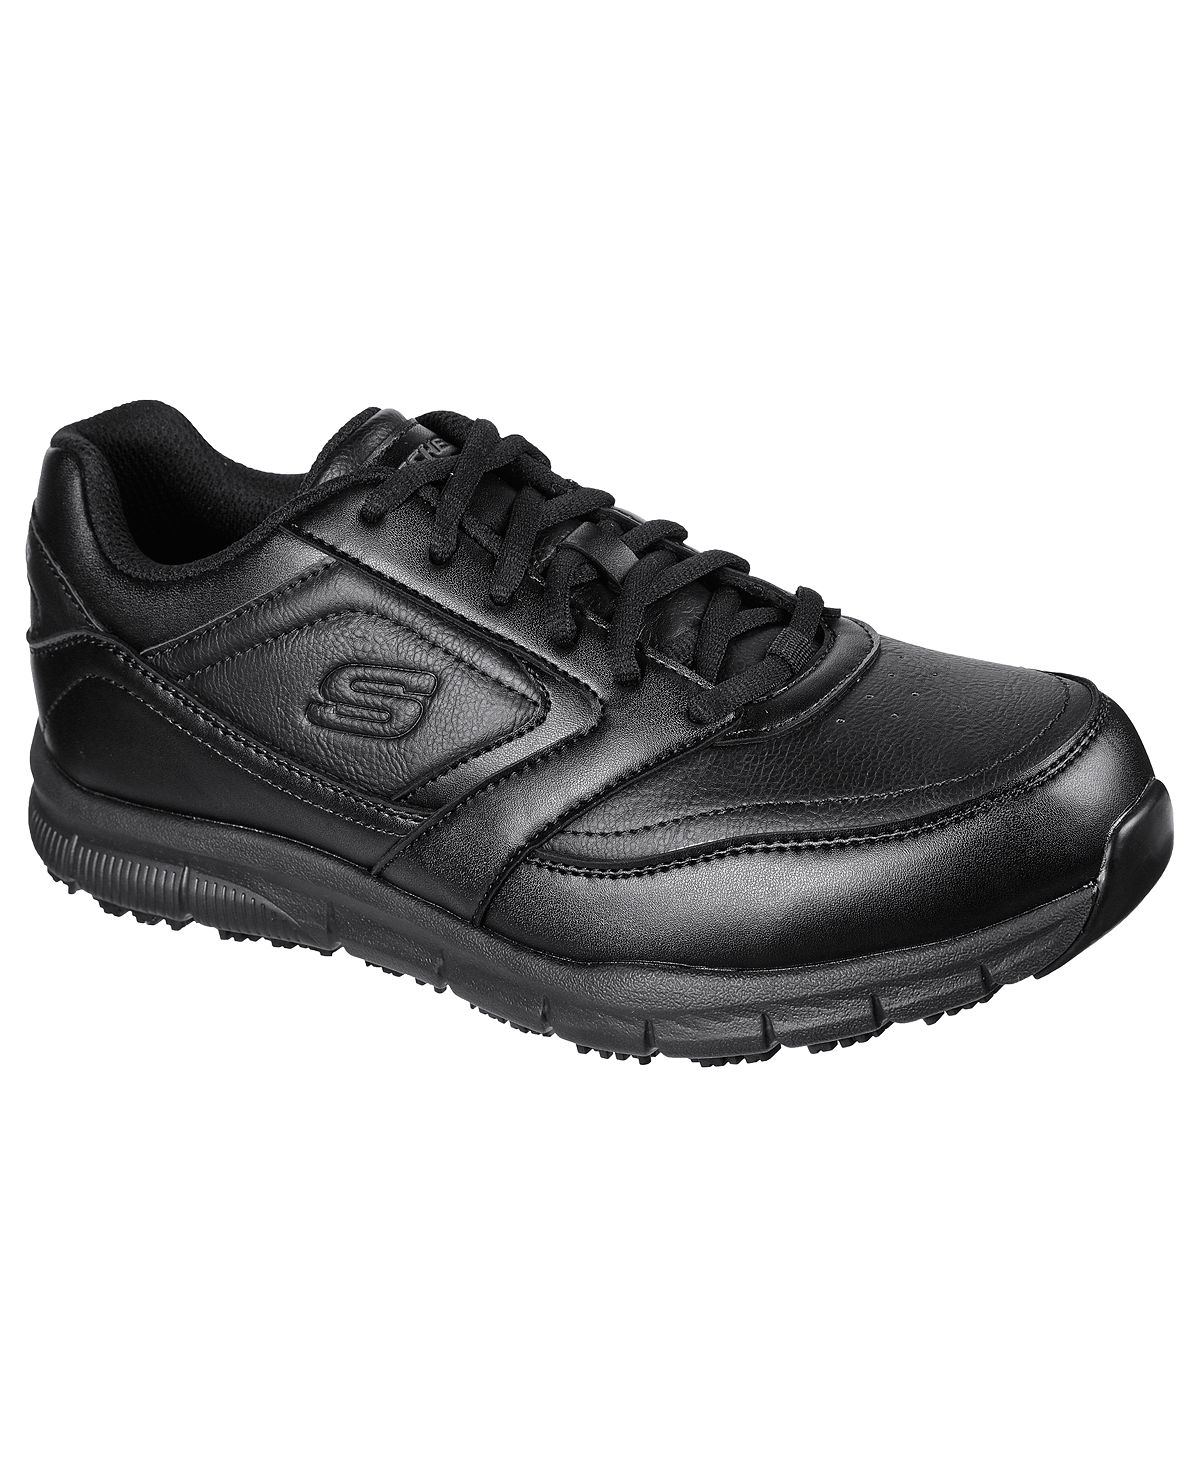 Кроссовки Skechers Men's Work Relaxed Fit Nampa Slip Resistant Work Casual From Finish Line, черный кроссовки skechers sport equalizer 3 0 sumnin relaxed fit black